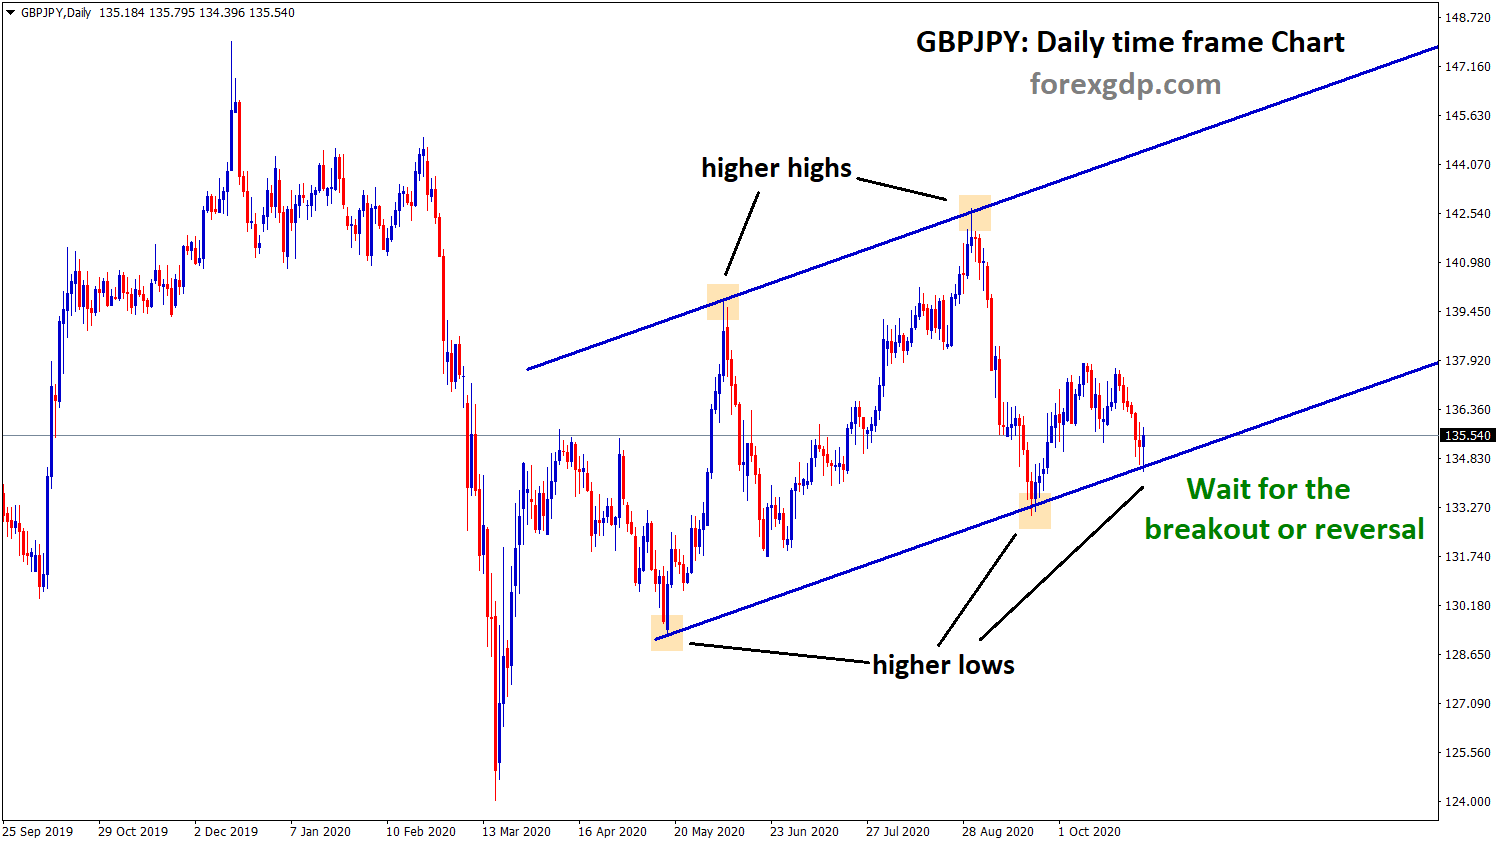 gbpjpy daily timeframe chart analysis Ascending channel